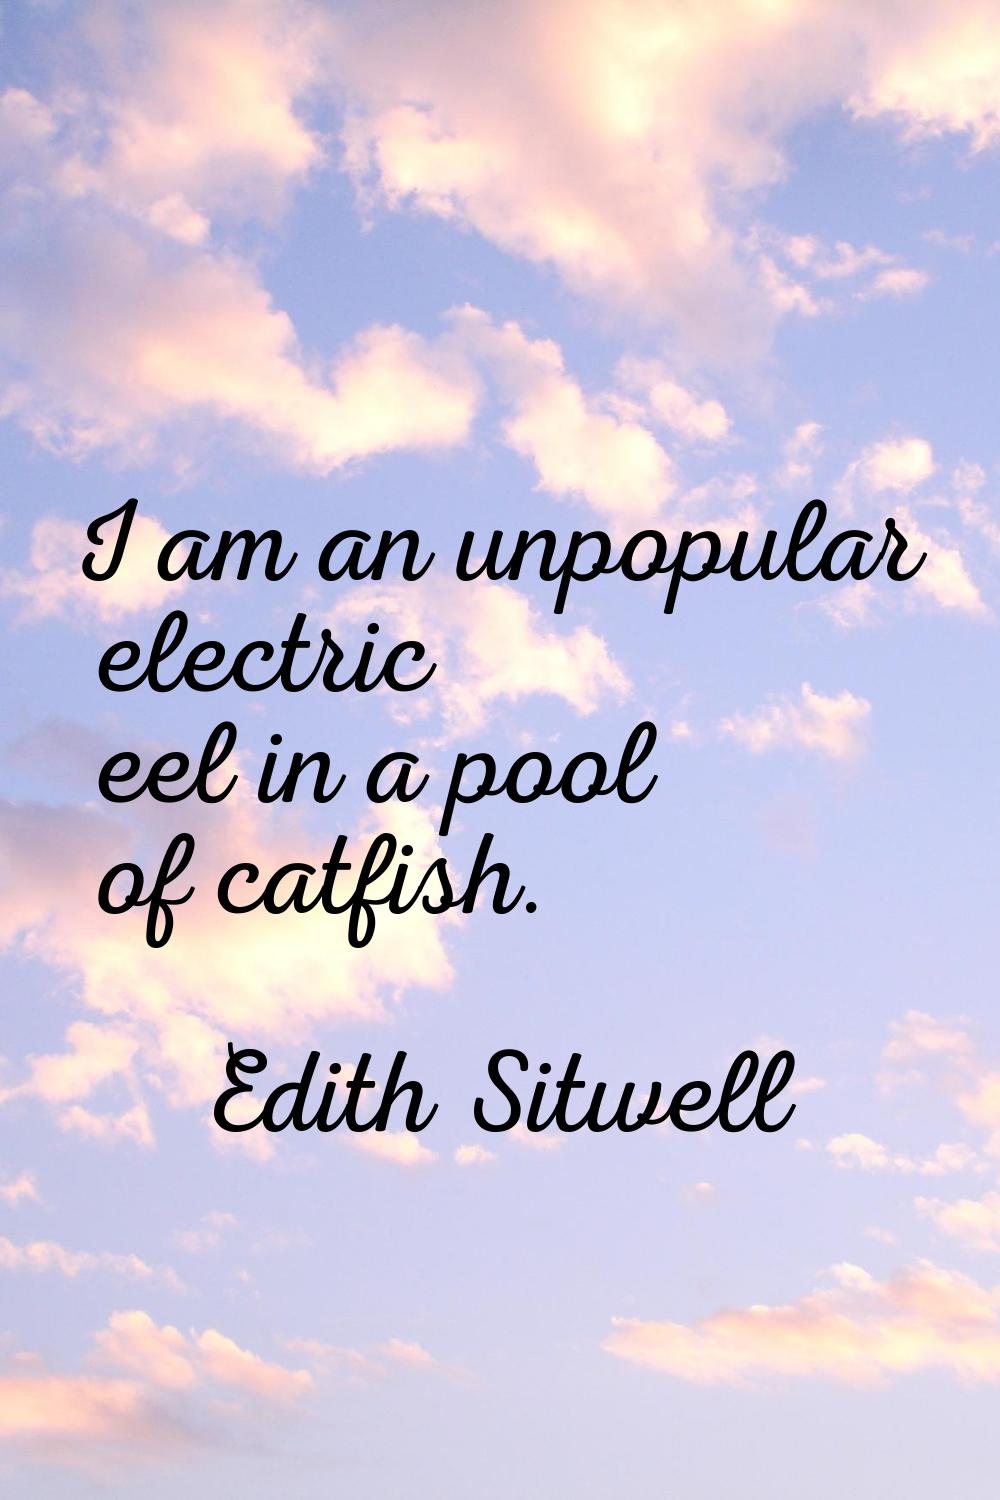 I am an unpopular electric eel in a pool of catfish.